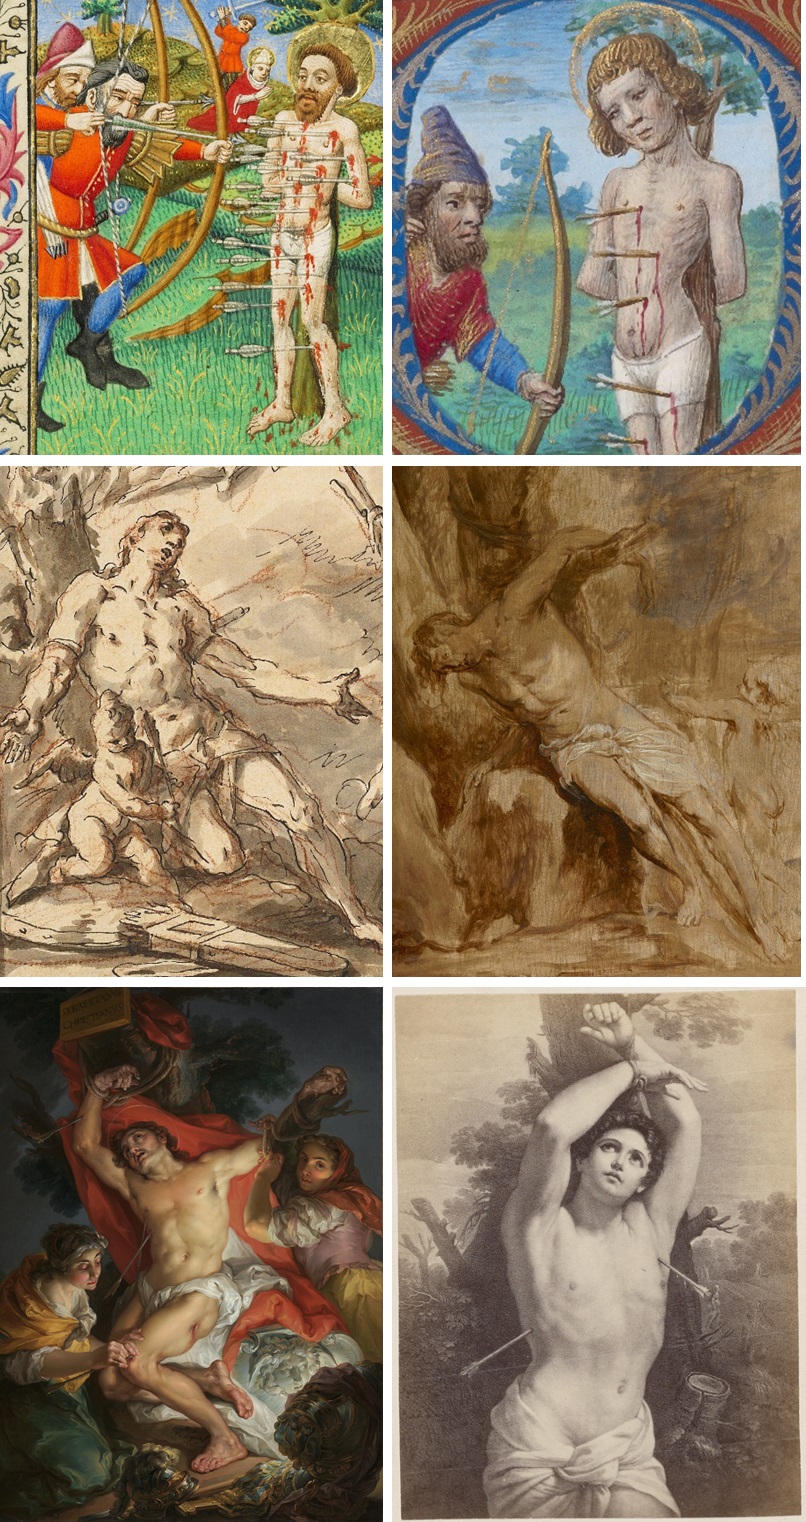 Images of Saint Sebastian in the Getty Museum collection: Master of Sir John Fastolf, about 1430–40 (Ms. 5, fol. 36v); Georges Trubert, about 1480–90 (Ms. 48, fol. 173v); Gaspare Diziani, about 1718 (2004.83); Anthony van Dyck, about 1630–32 (85.PB.31); Vicente López y Portaña, 1795–1800 (2000.47); Unknown British photographer after Gudio Reni, about 1865–85 (84.XP.1411.62).